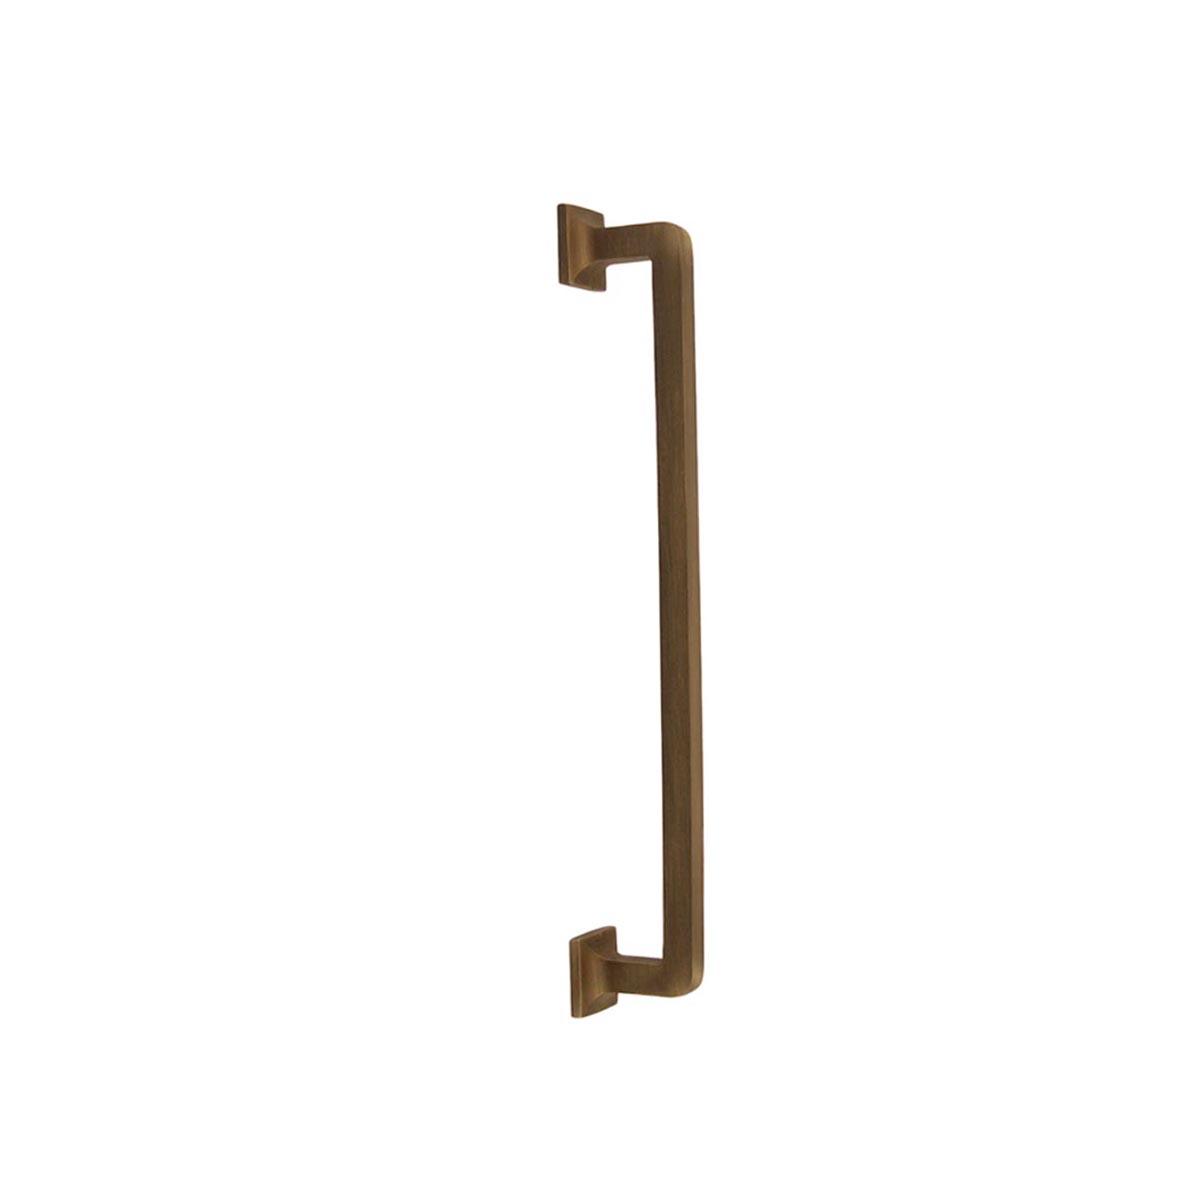 Cabinet Handles - Cup Pulls - Paxton Hardware